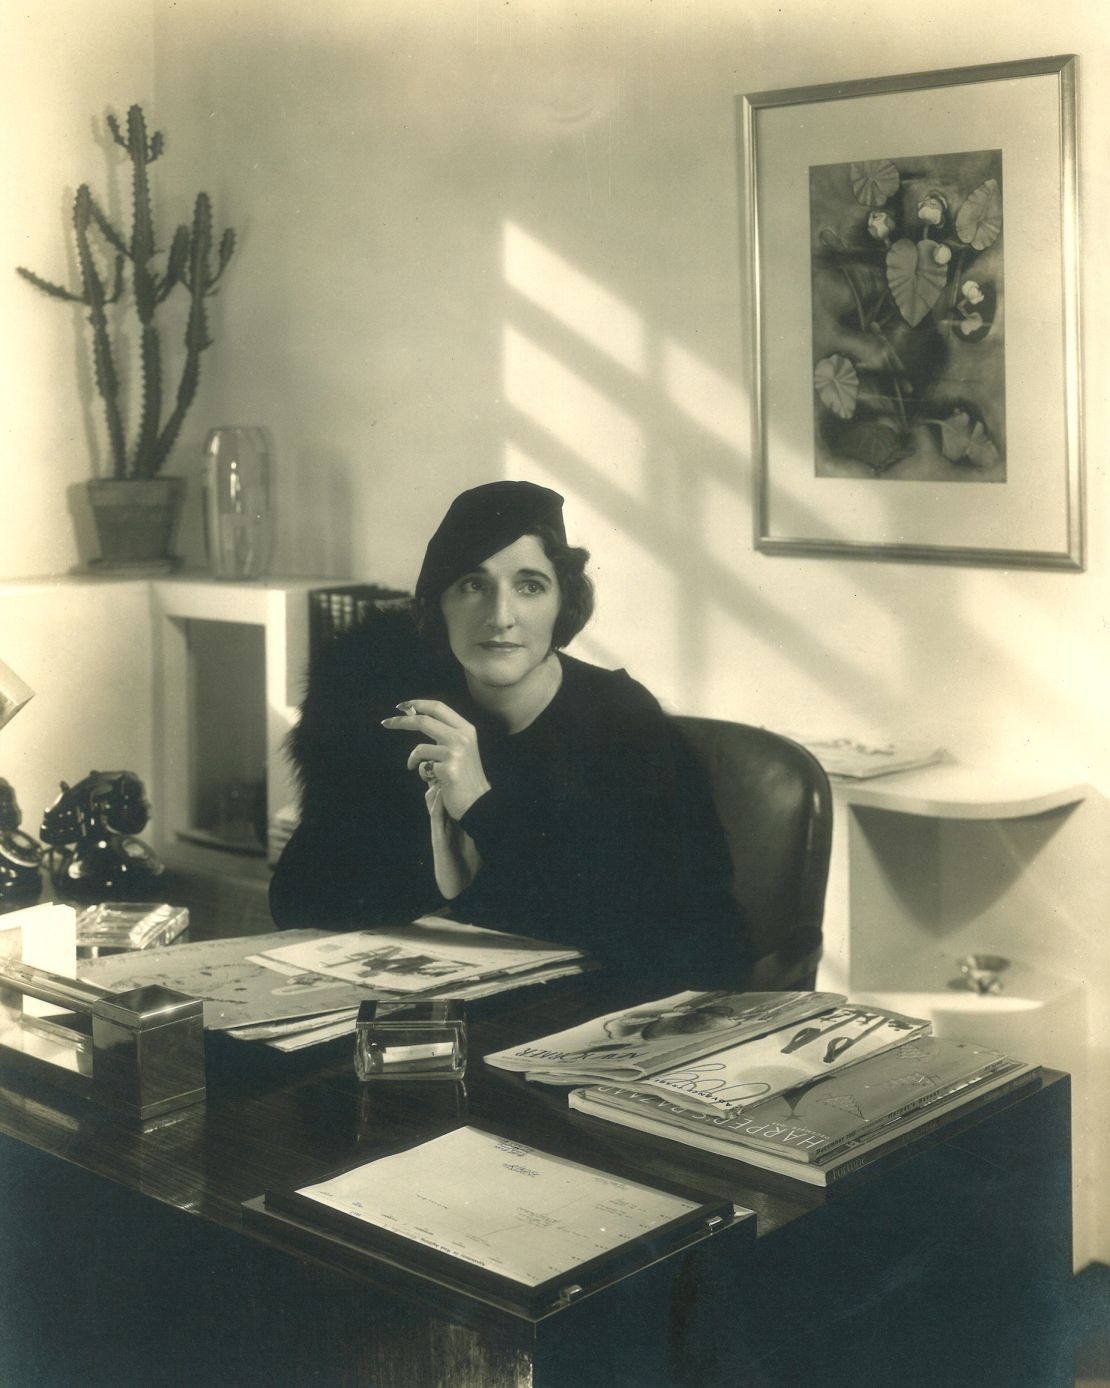 Satow’s evocation of this historic age is timely, with the death knell for many US department stores well and truly ringing in our ears. Once, though, these grand destinations were a novelty and a sanctum for women across society. Pictured above, Dorothy Shaver in her office and Lord & Taylor, circa 1920.